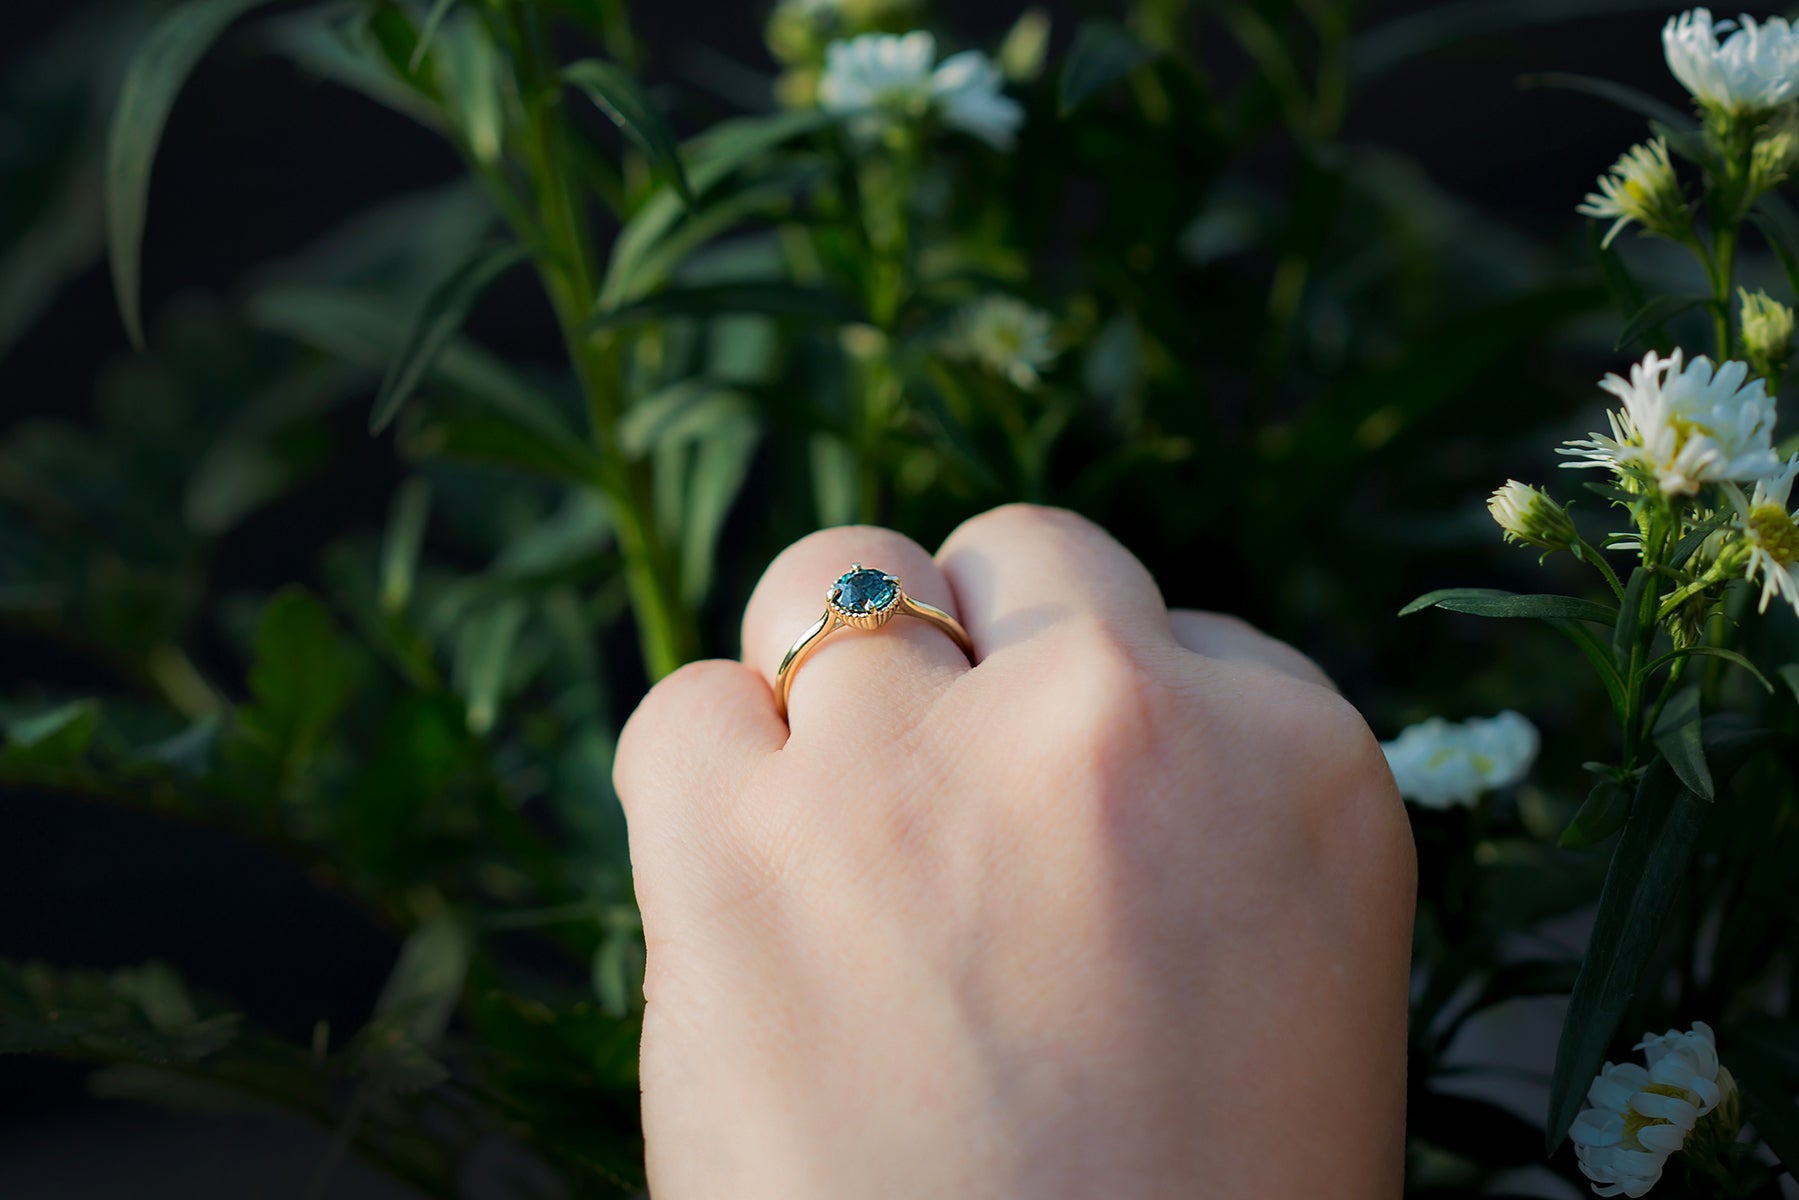 Teal Montana Sapphire Solitaire Engagement Ring - S. Kind & Co